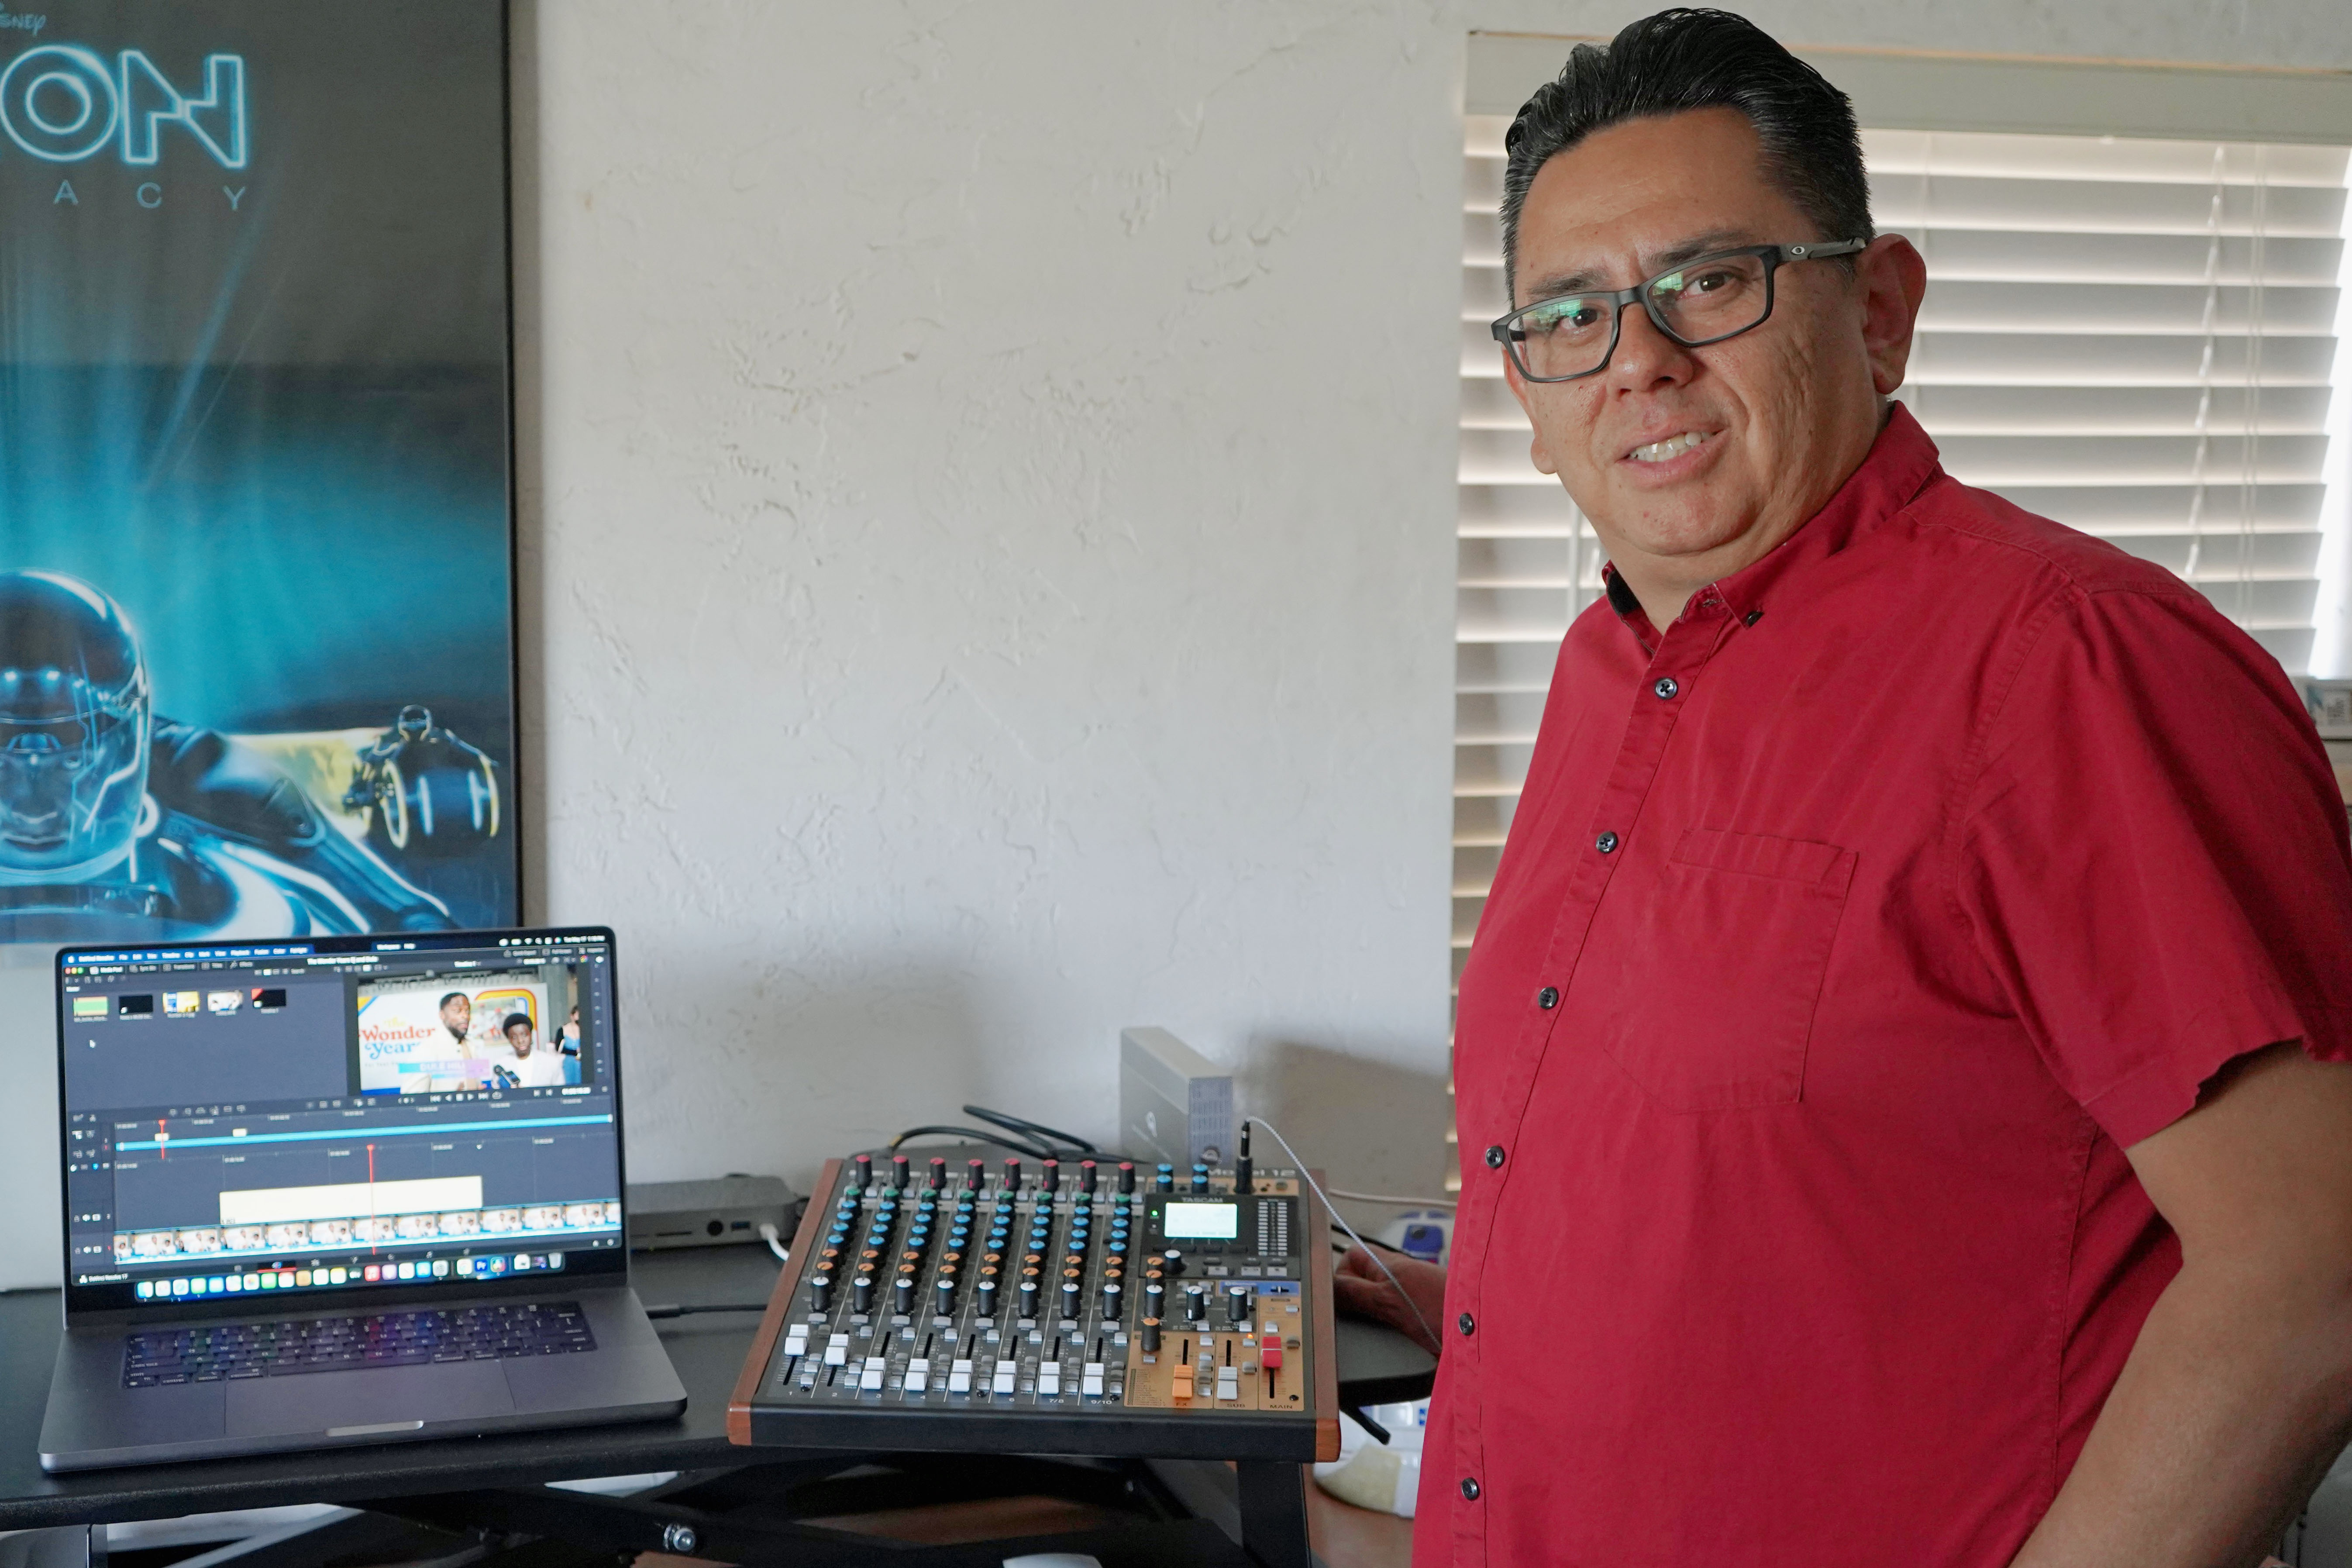 The TASCAM Model 12  is Central to Michael Sandoval's Audio/Livestreaming & Video Production